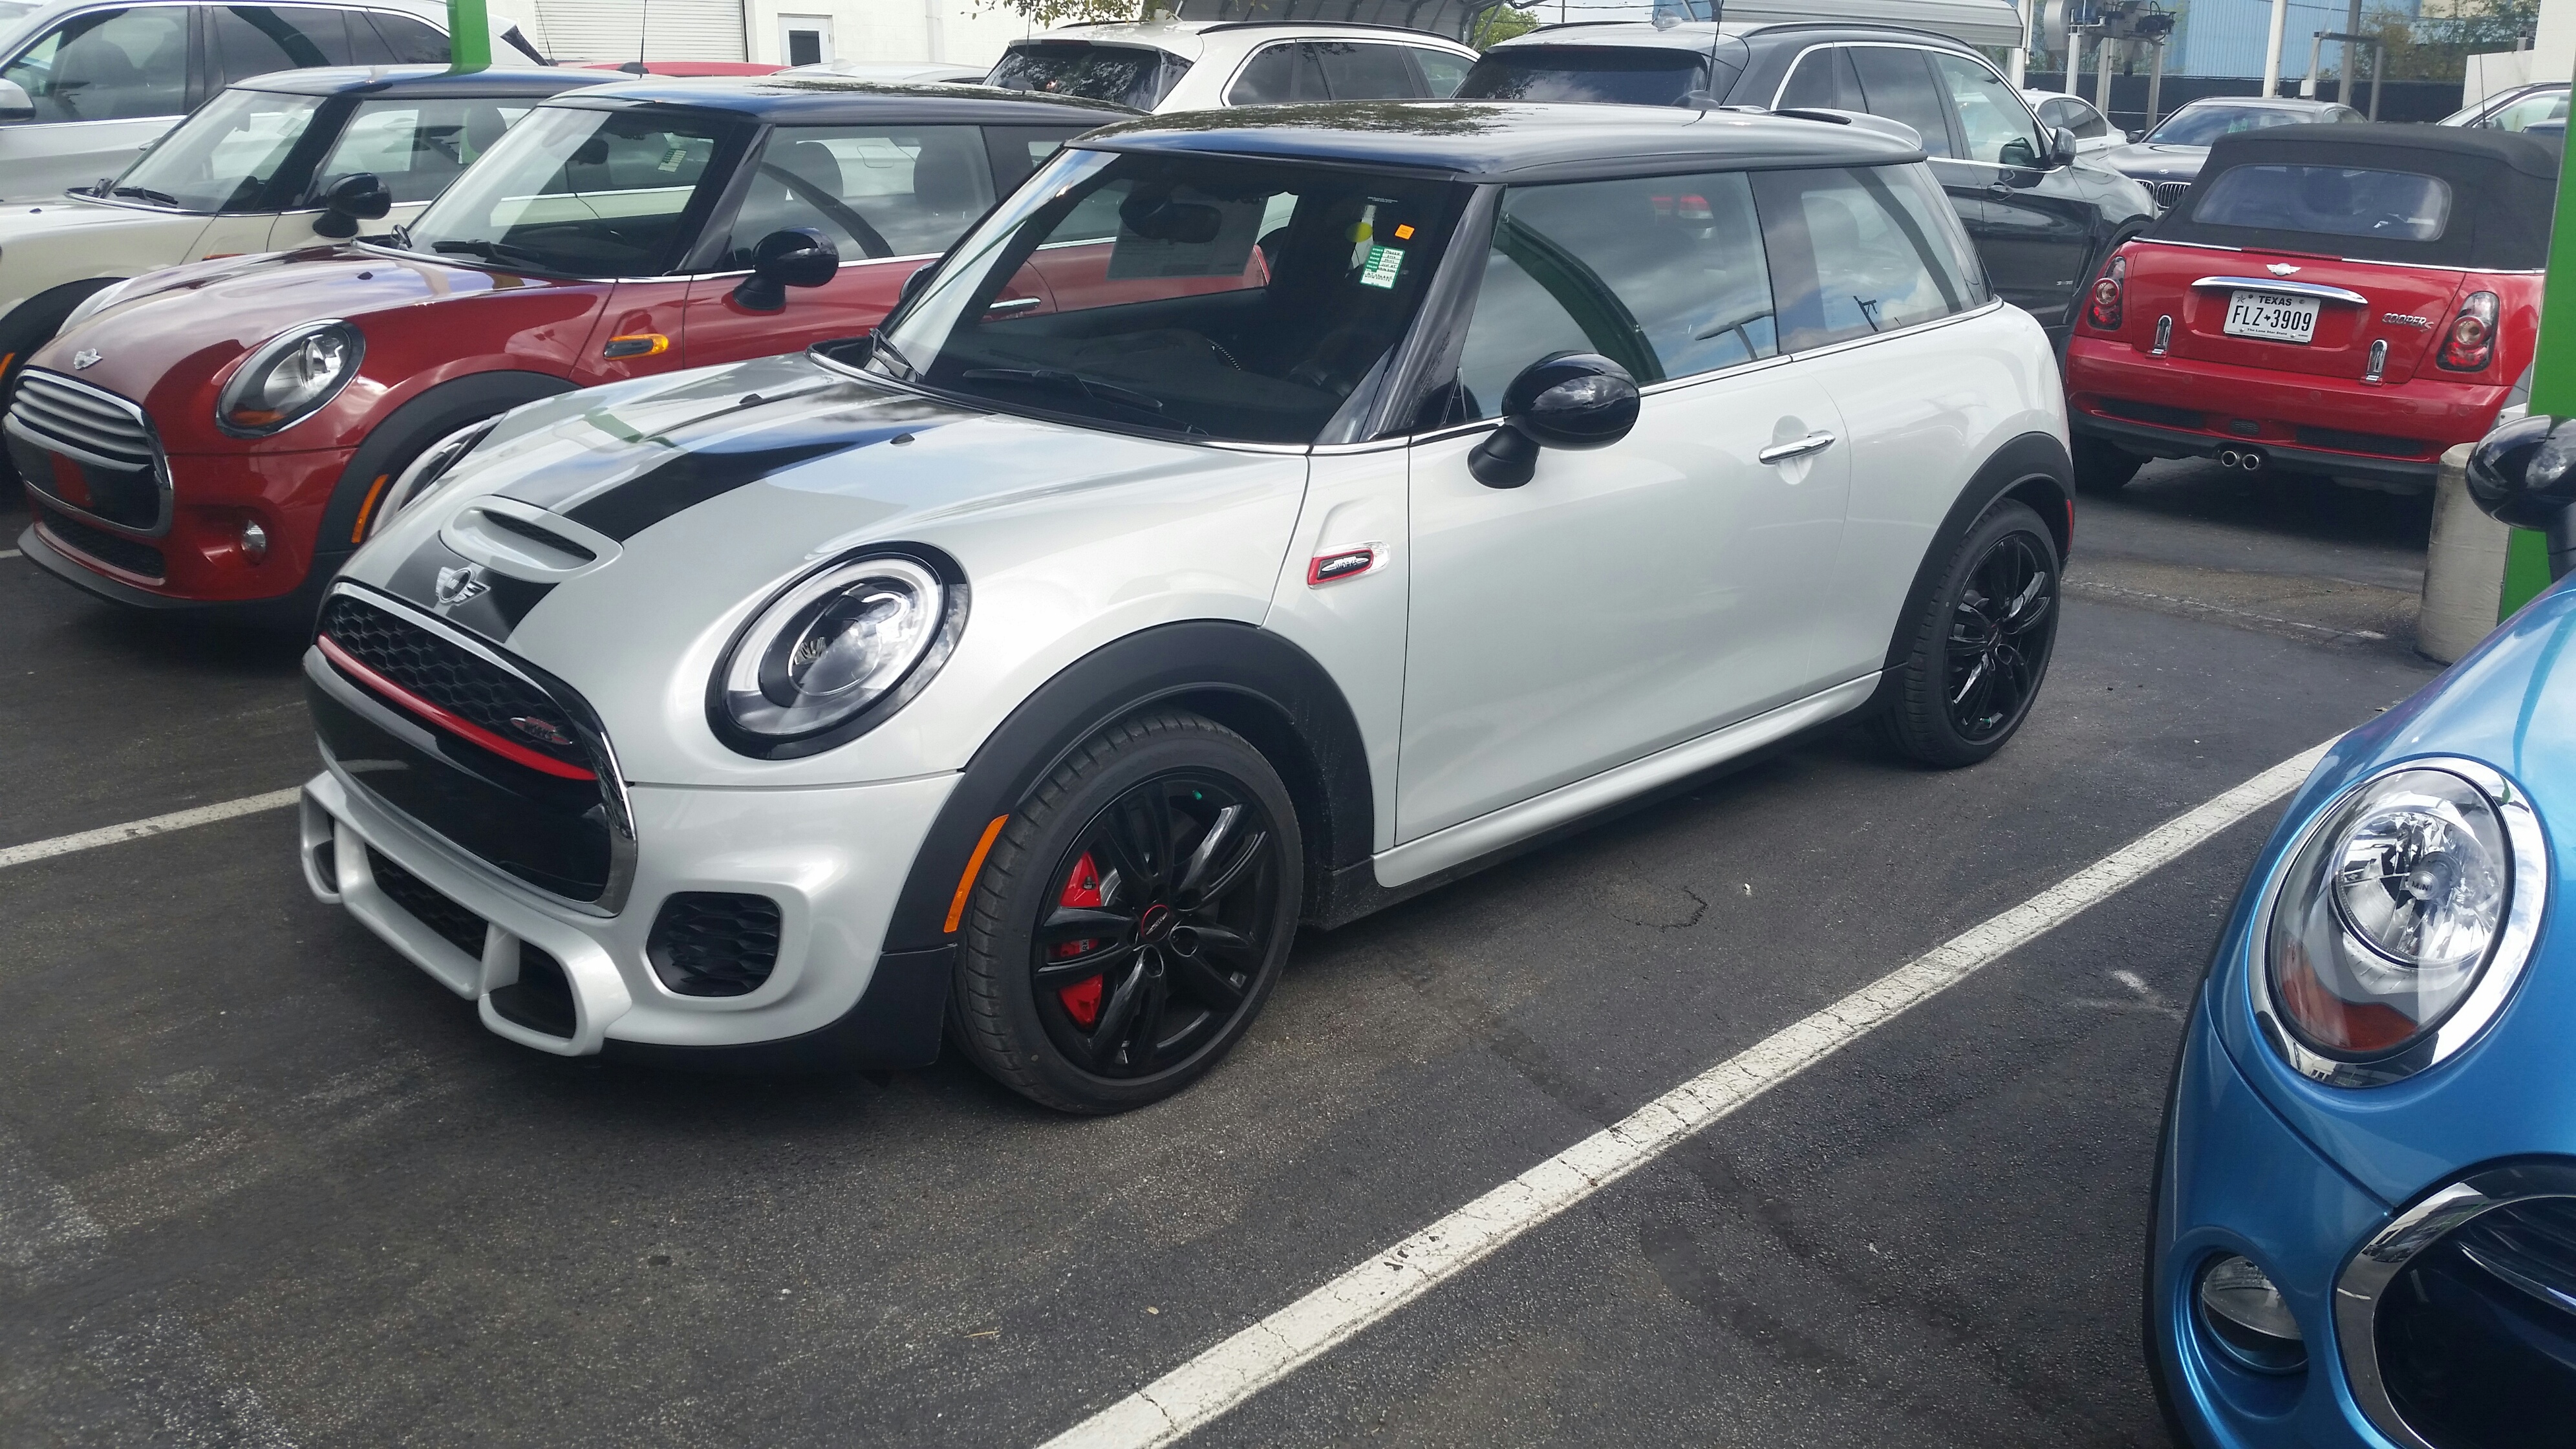 JCW 2016 JWC Finally Showed Up - North American Motoring